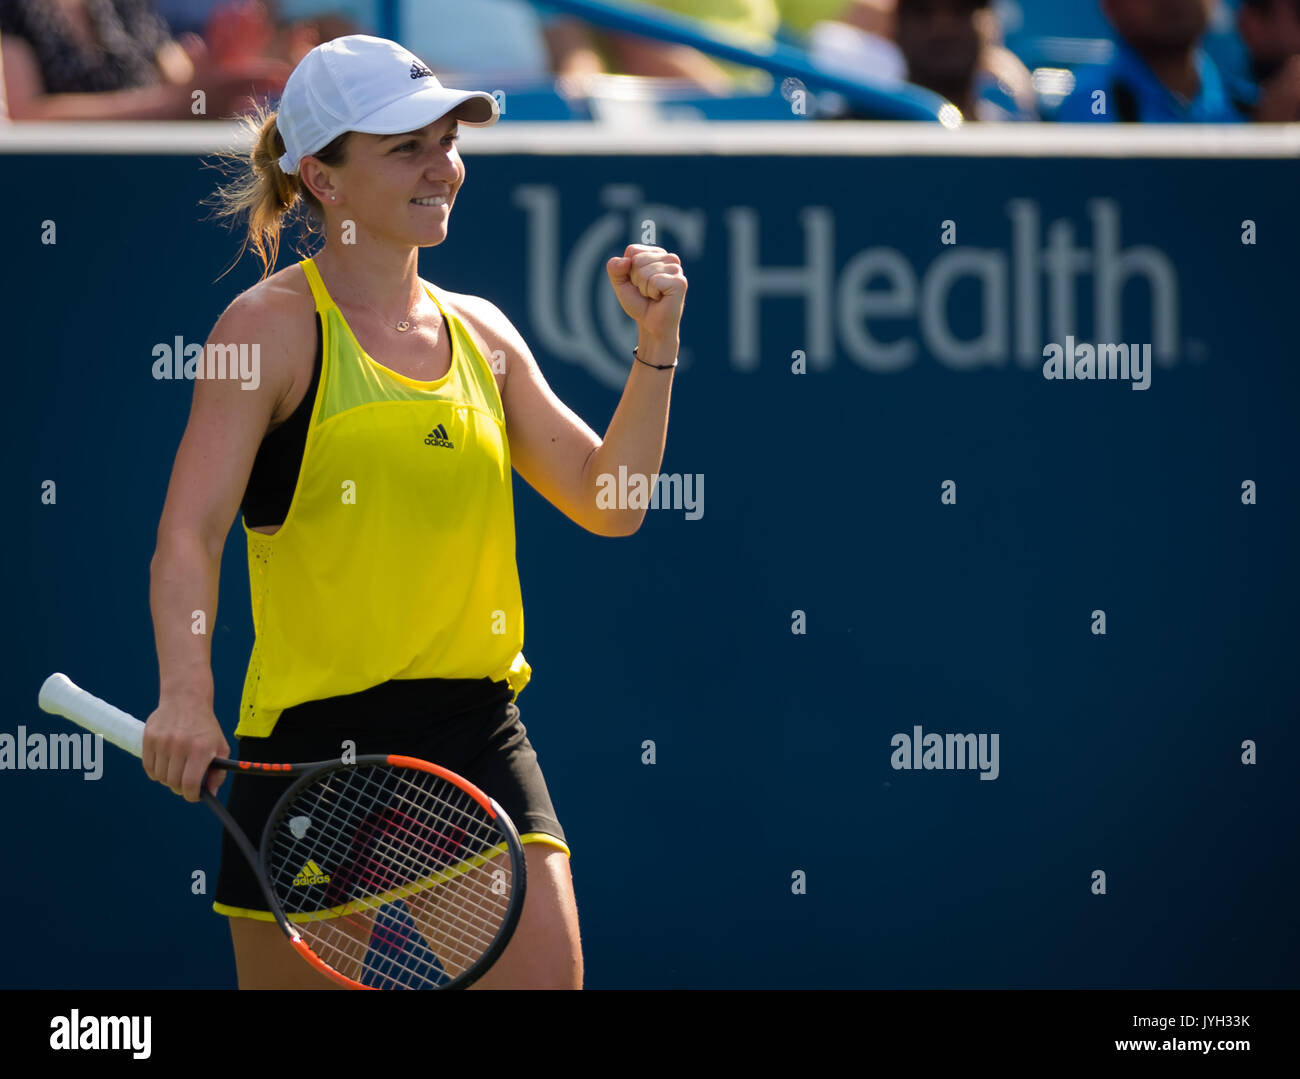 Cincinnati, United States. 19th Aug, 2017. Simona Halep of Romania at the  2017 Western & Southern Open WTA Premier 5 tennis tournament Credit:  Jimmie48 Photography/Alamy Live News Stock Photo - Alamy